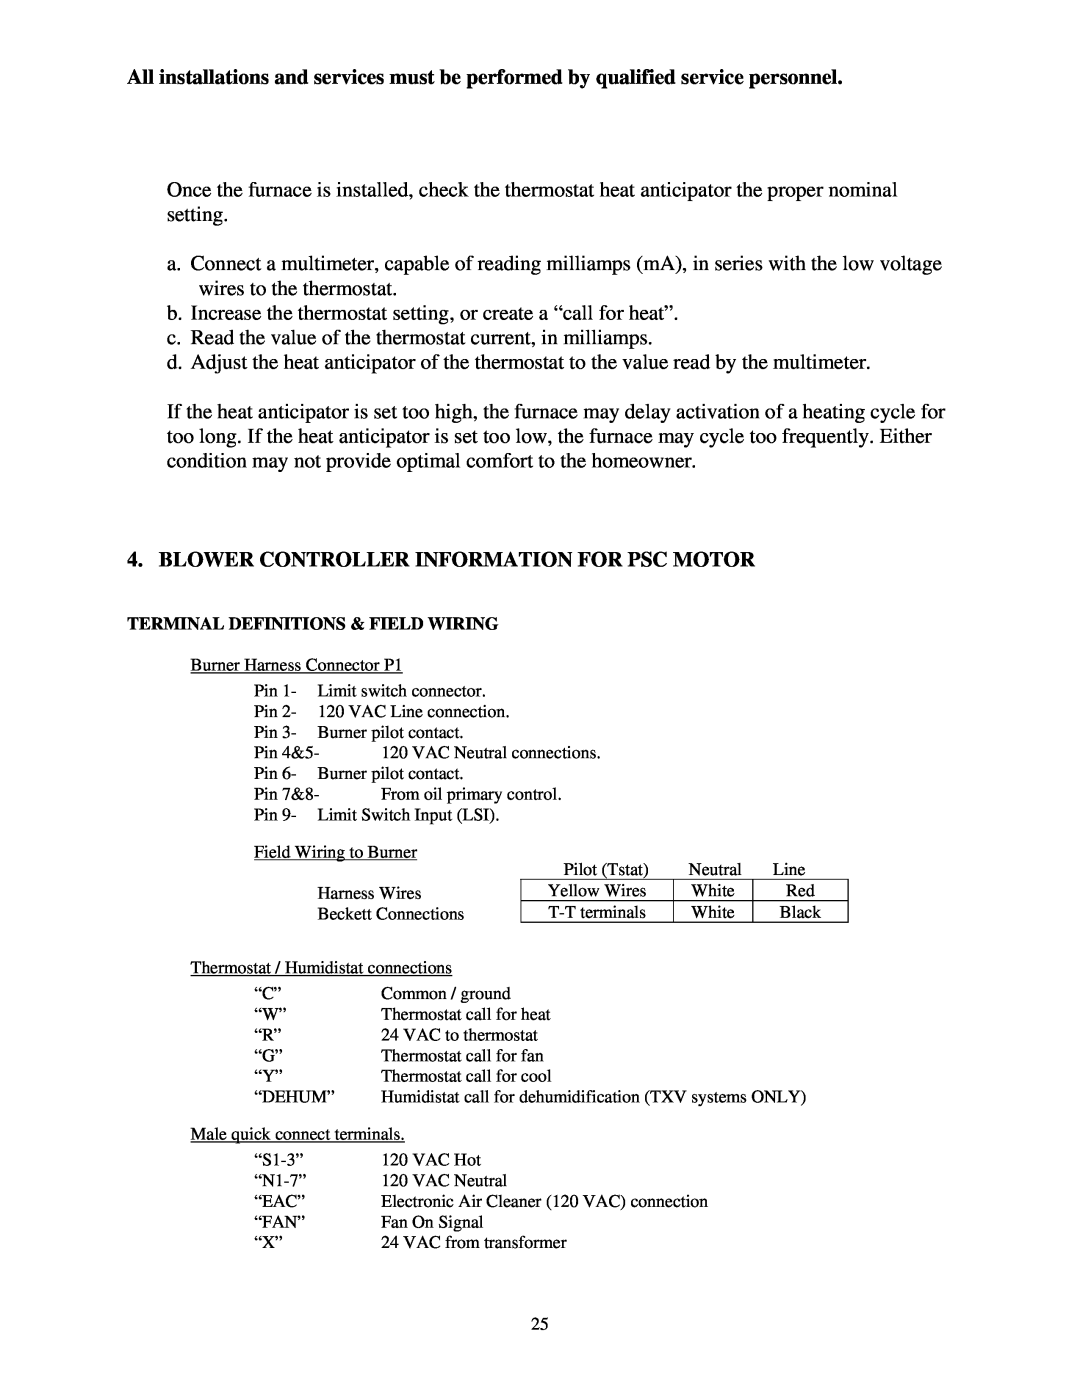 Thermo Products omd-70 service manual Blower Controller Information For Psc Motor, Terminal Definitions & Field Wiring 